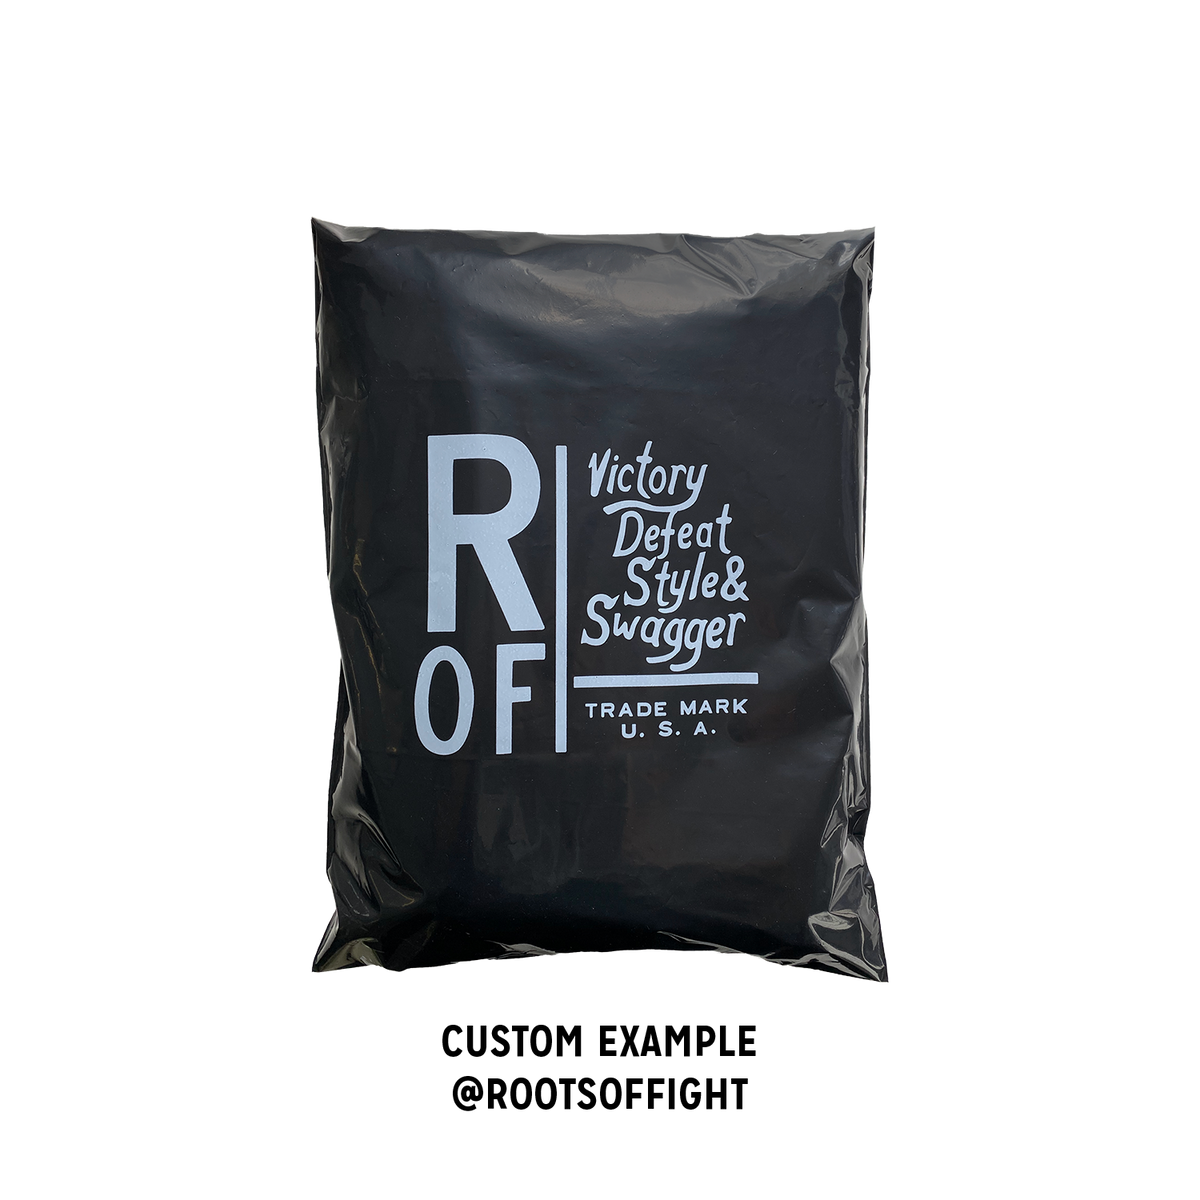 Roots of Fight branded custom Better Packaging POLLAST!C black mailer on a transparent background